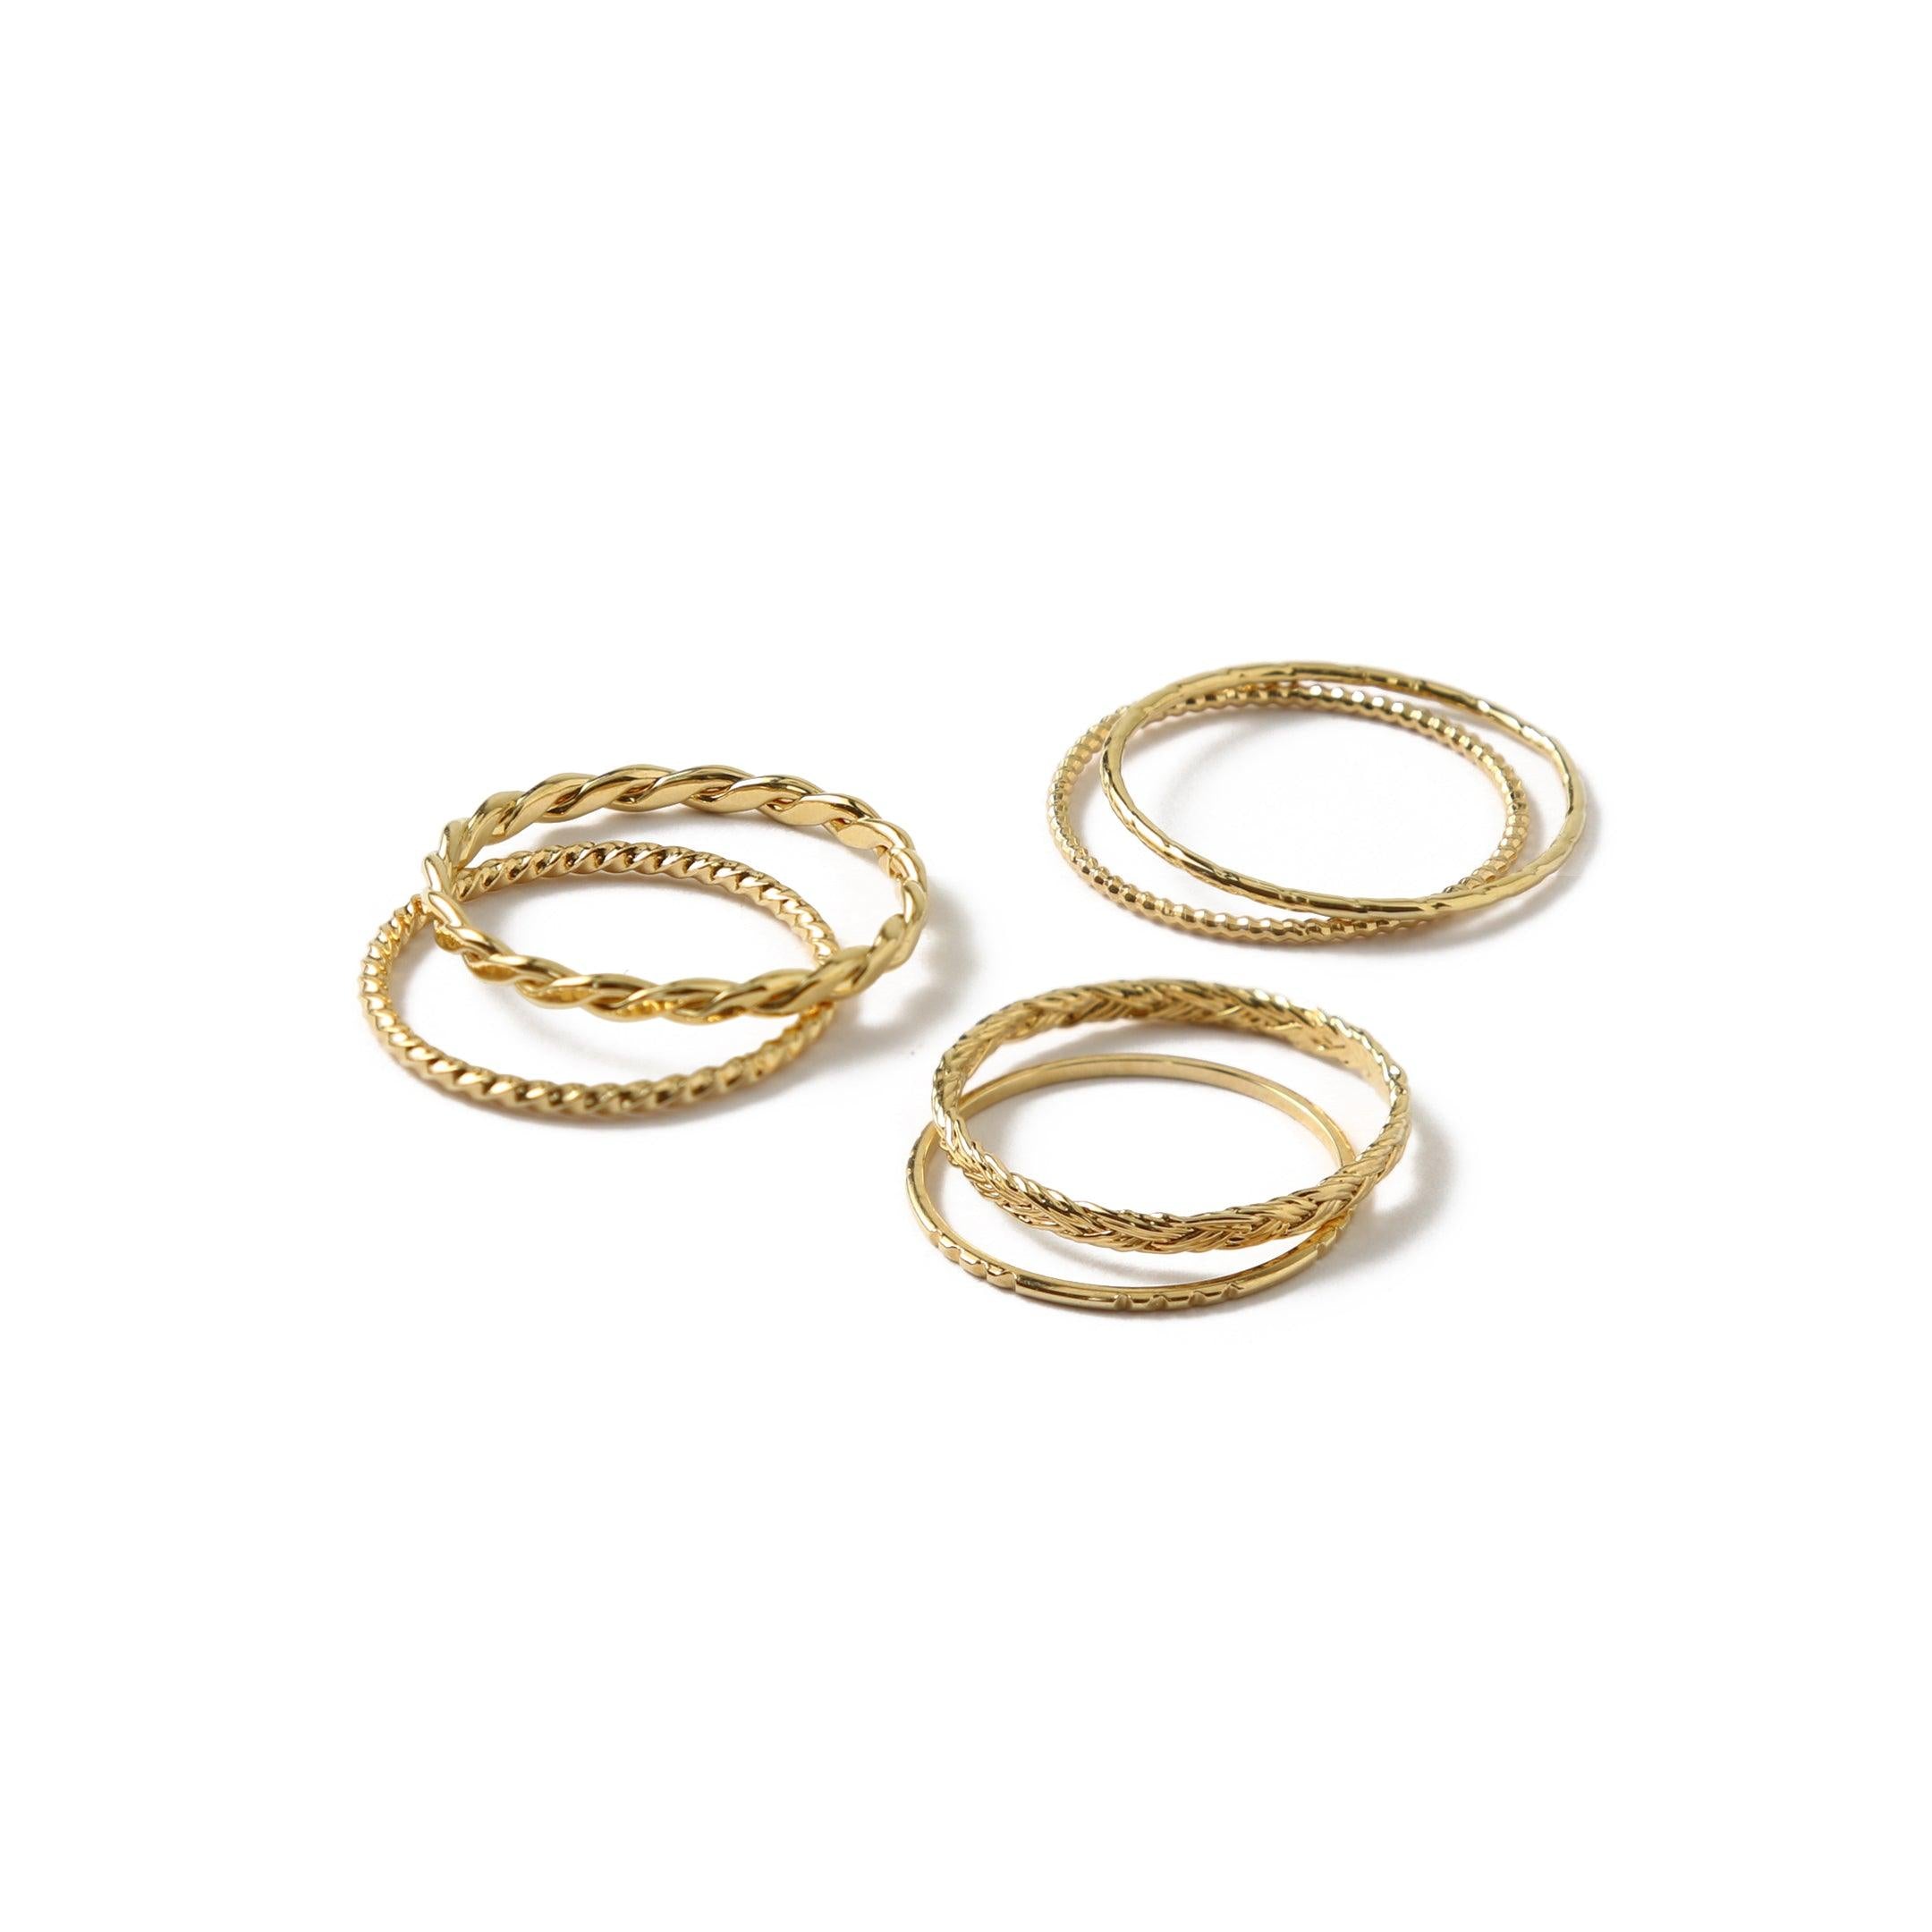 Multi 4 Ring Chain Rings in Gold and Silver Color 